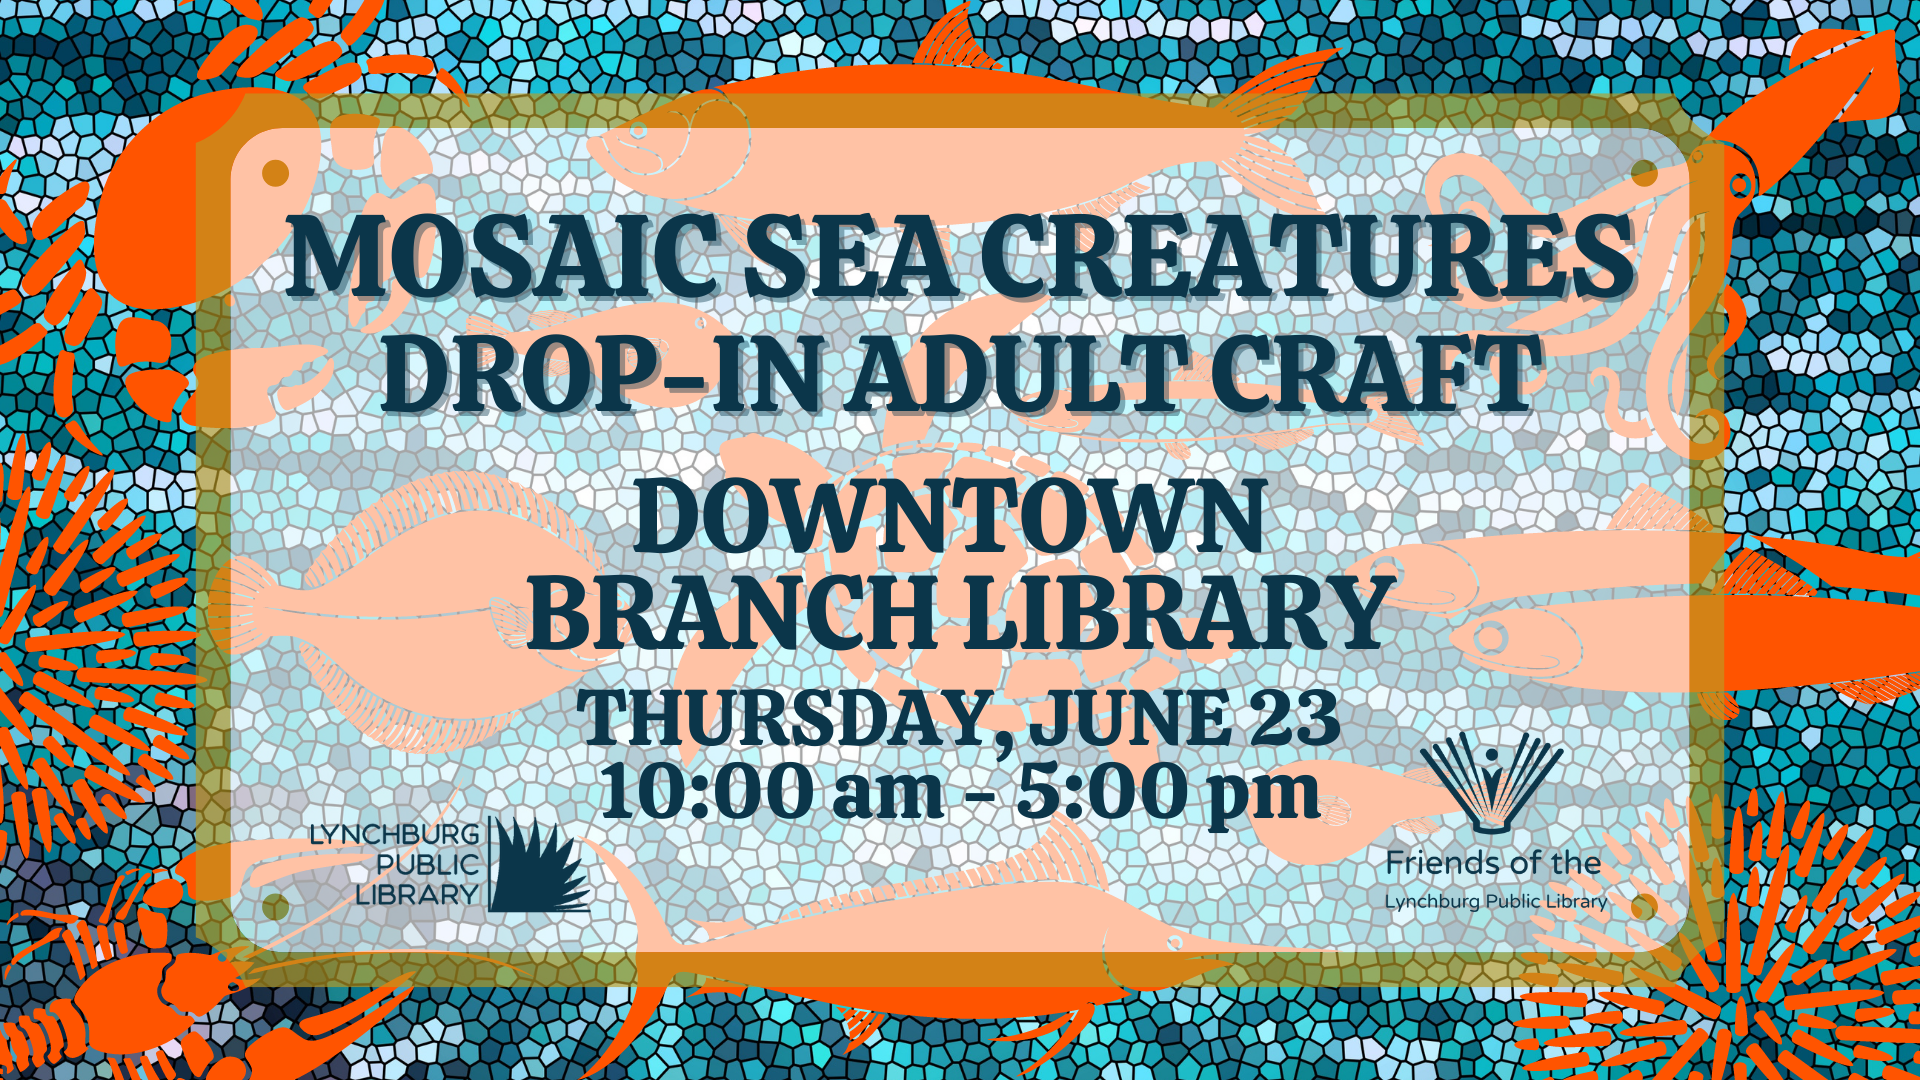 Downtown Branch Library drop in mosaic sea creatures craft. Thursday, June 23 from 10 am to 5 pm.